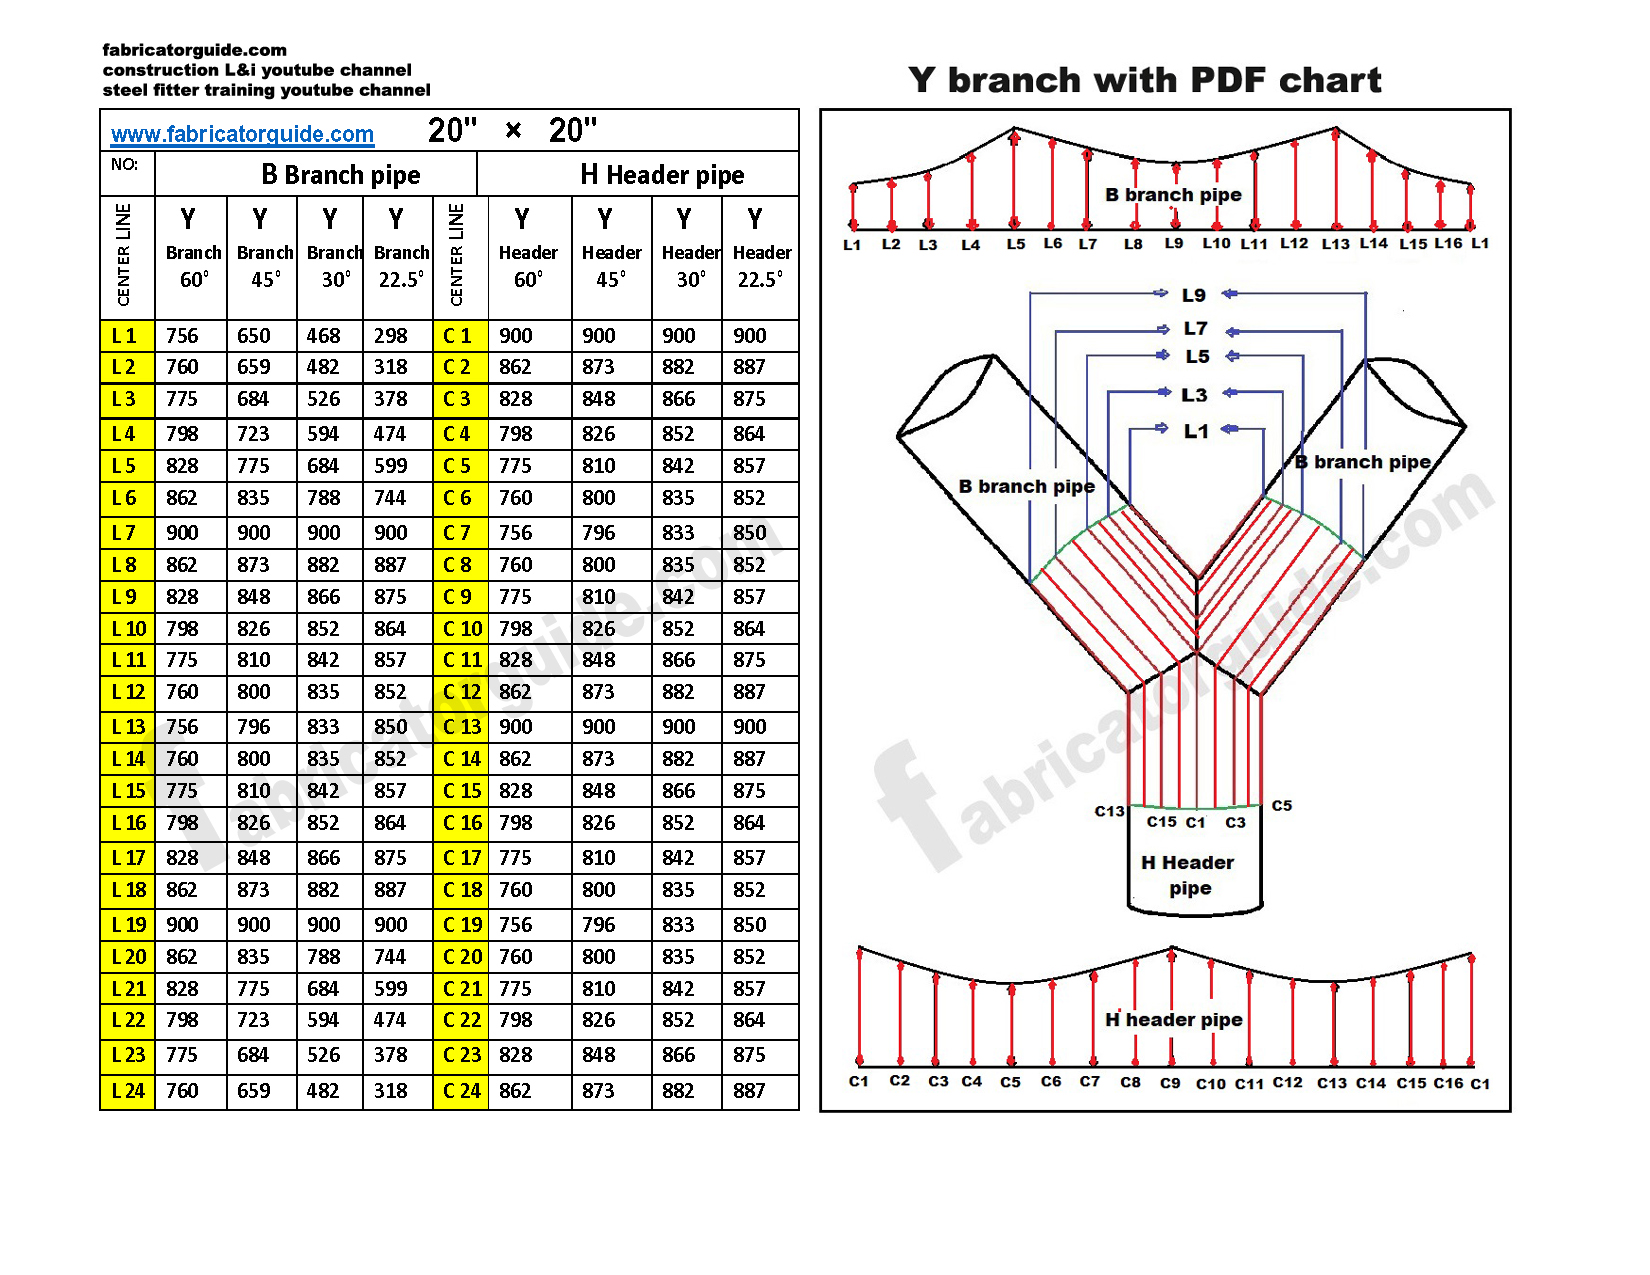 Piping Y Branch with PDF chart/ 16"/ 18"/ 20"